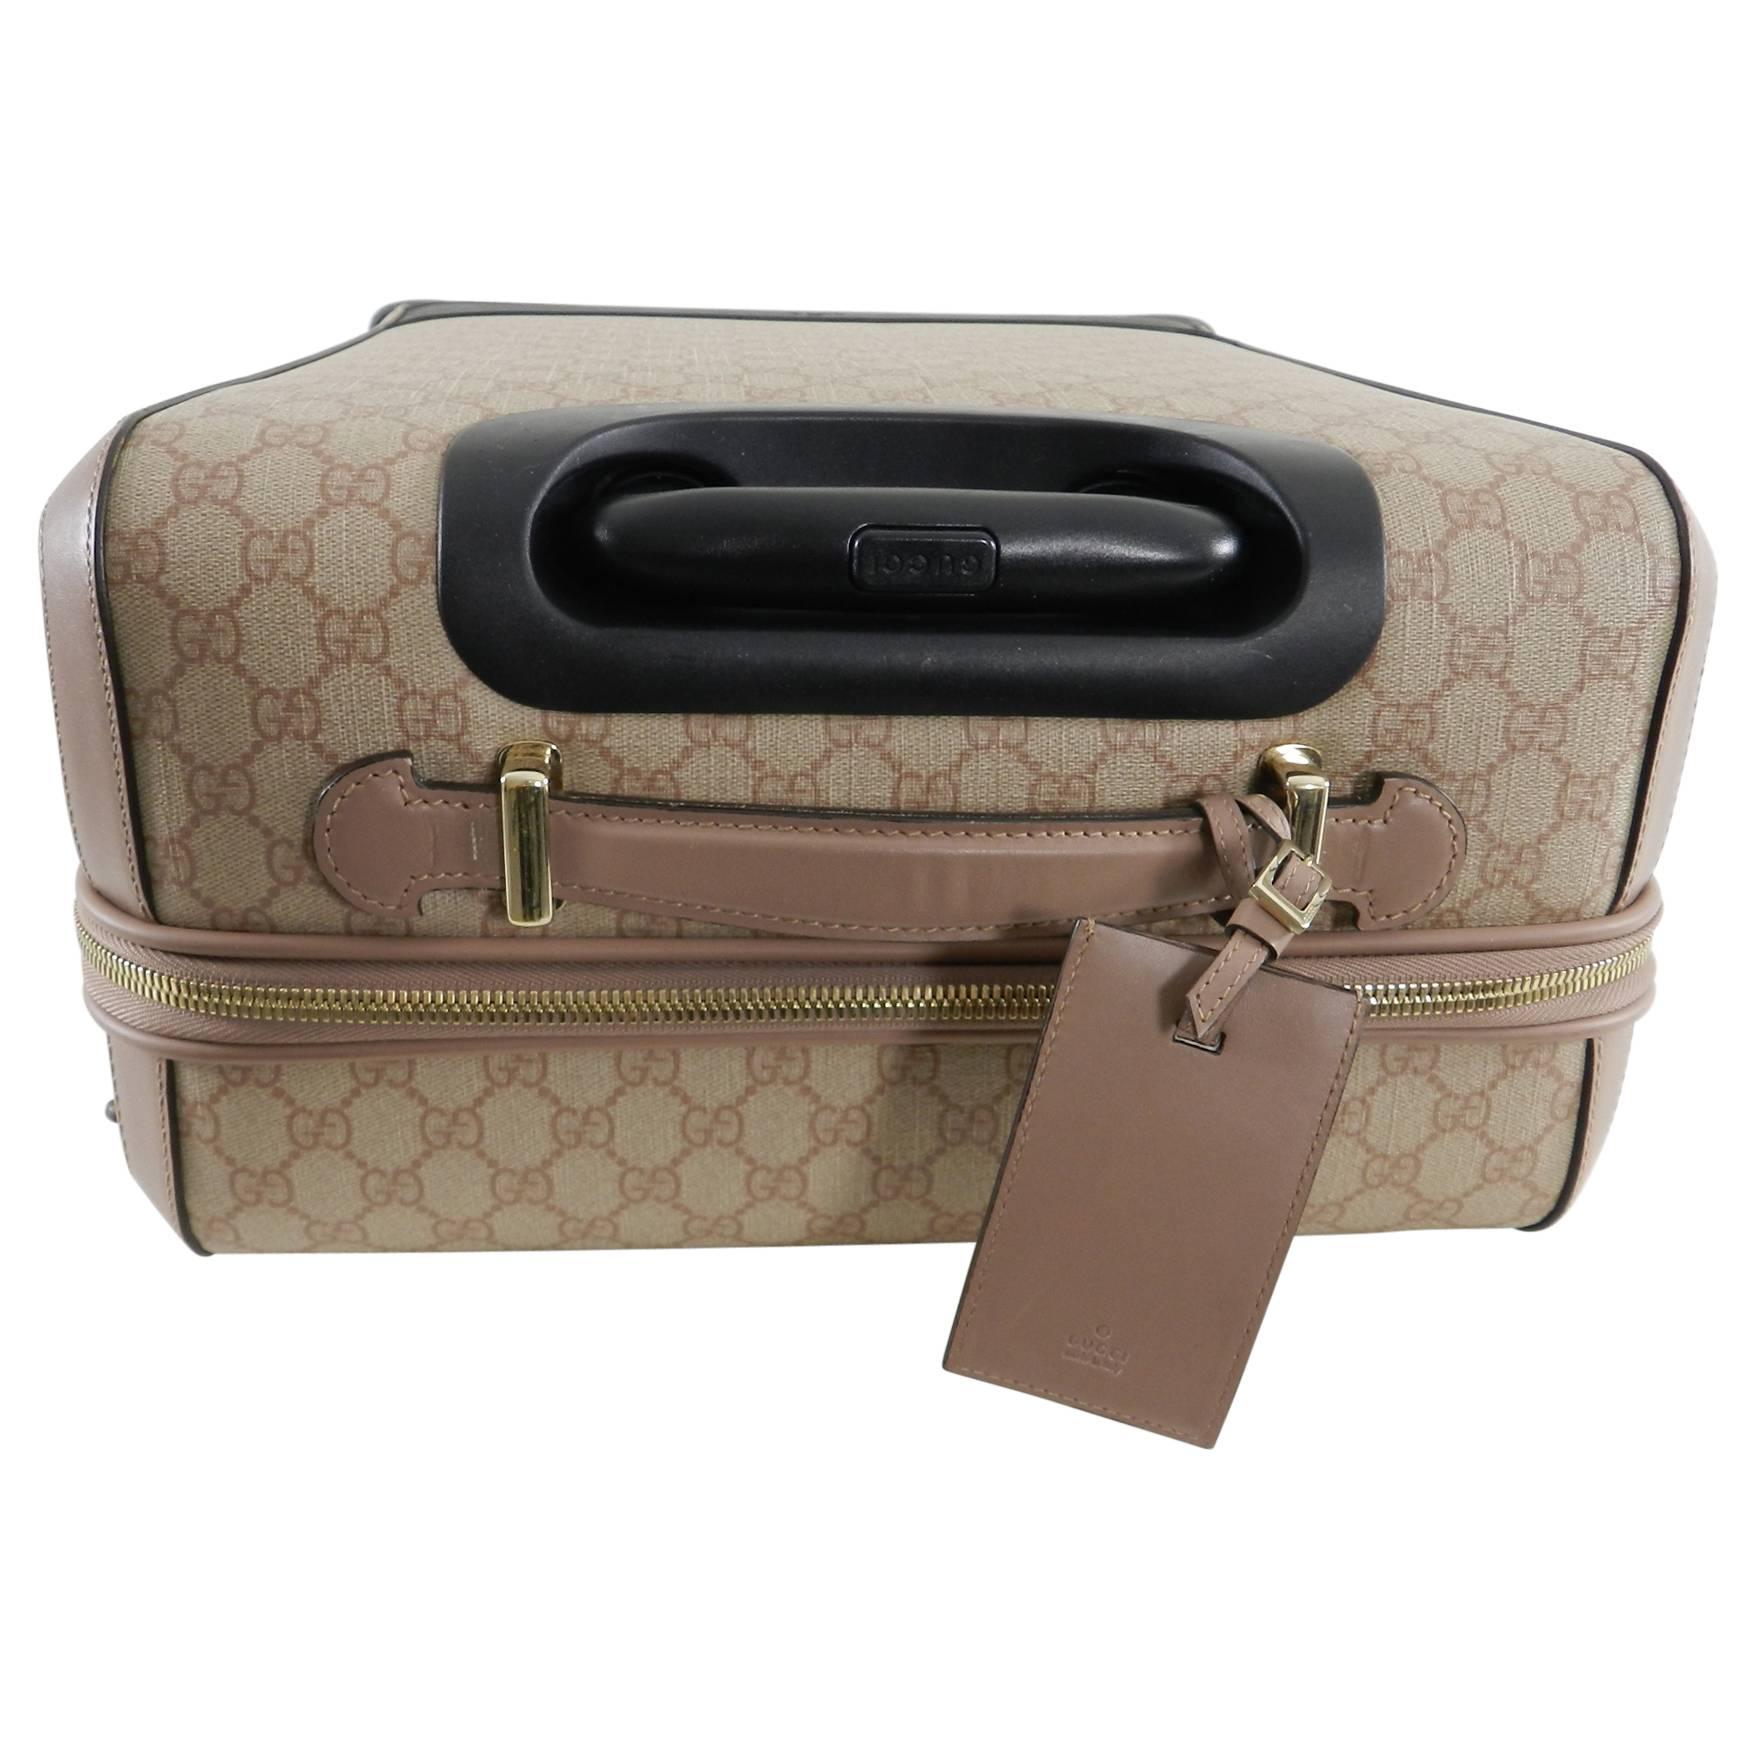 Gucci GG Supreme Monogram 4 Wheel Carry-on Luggage - Winter Rose 2